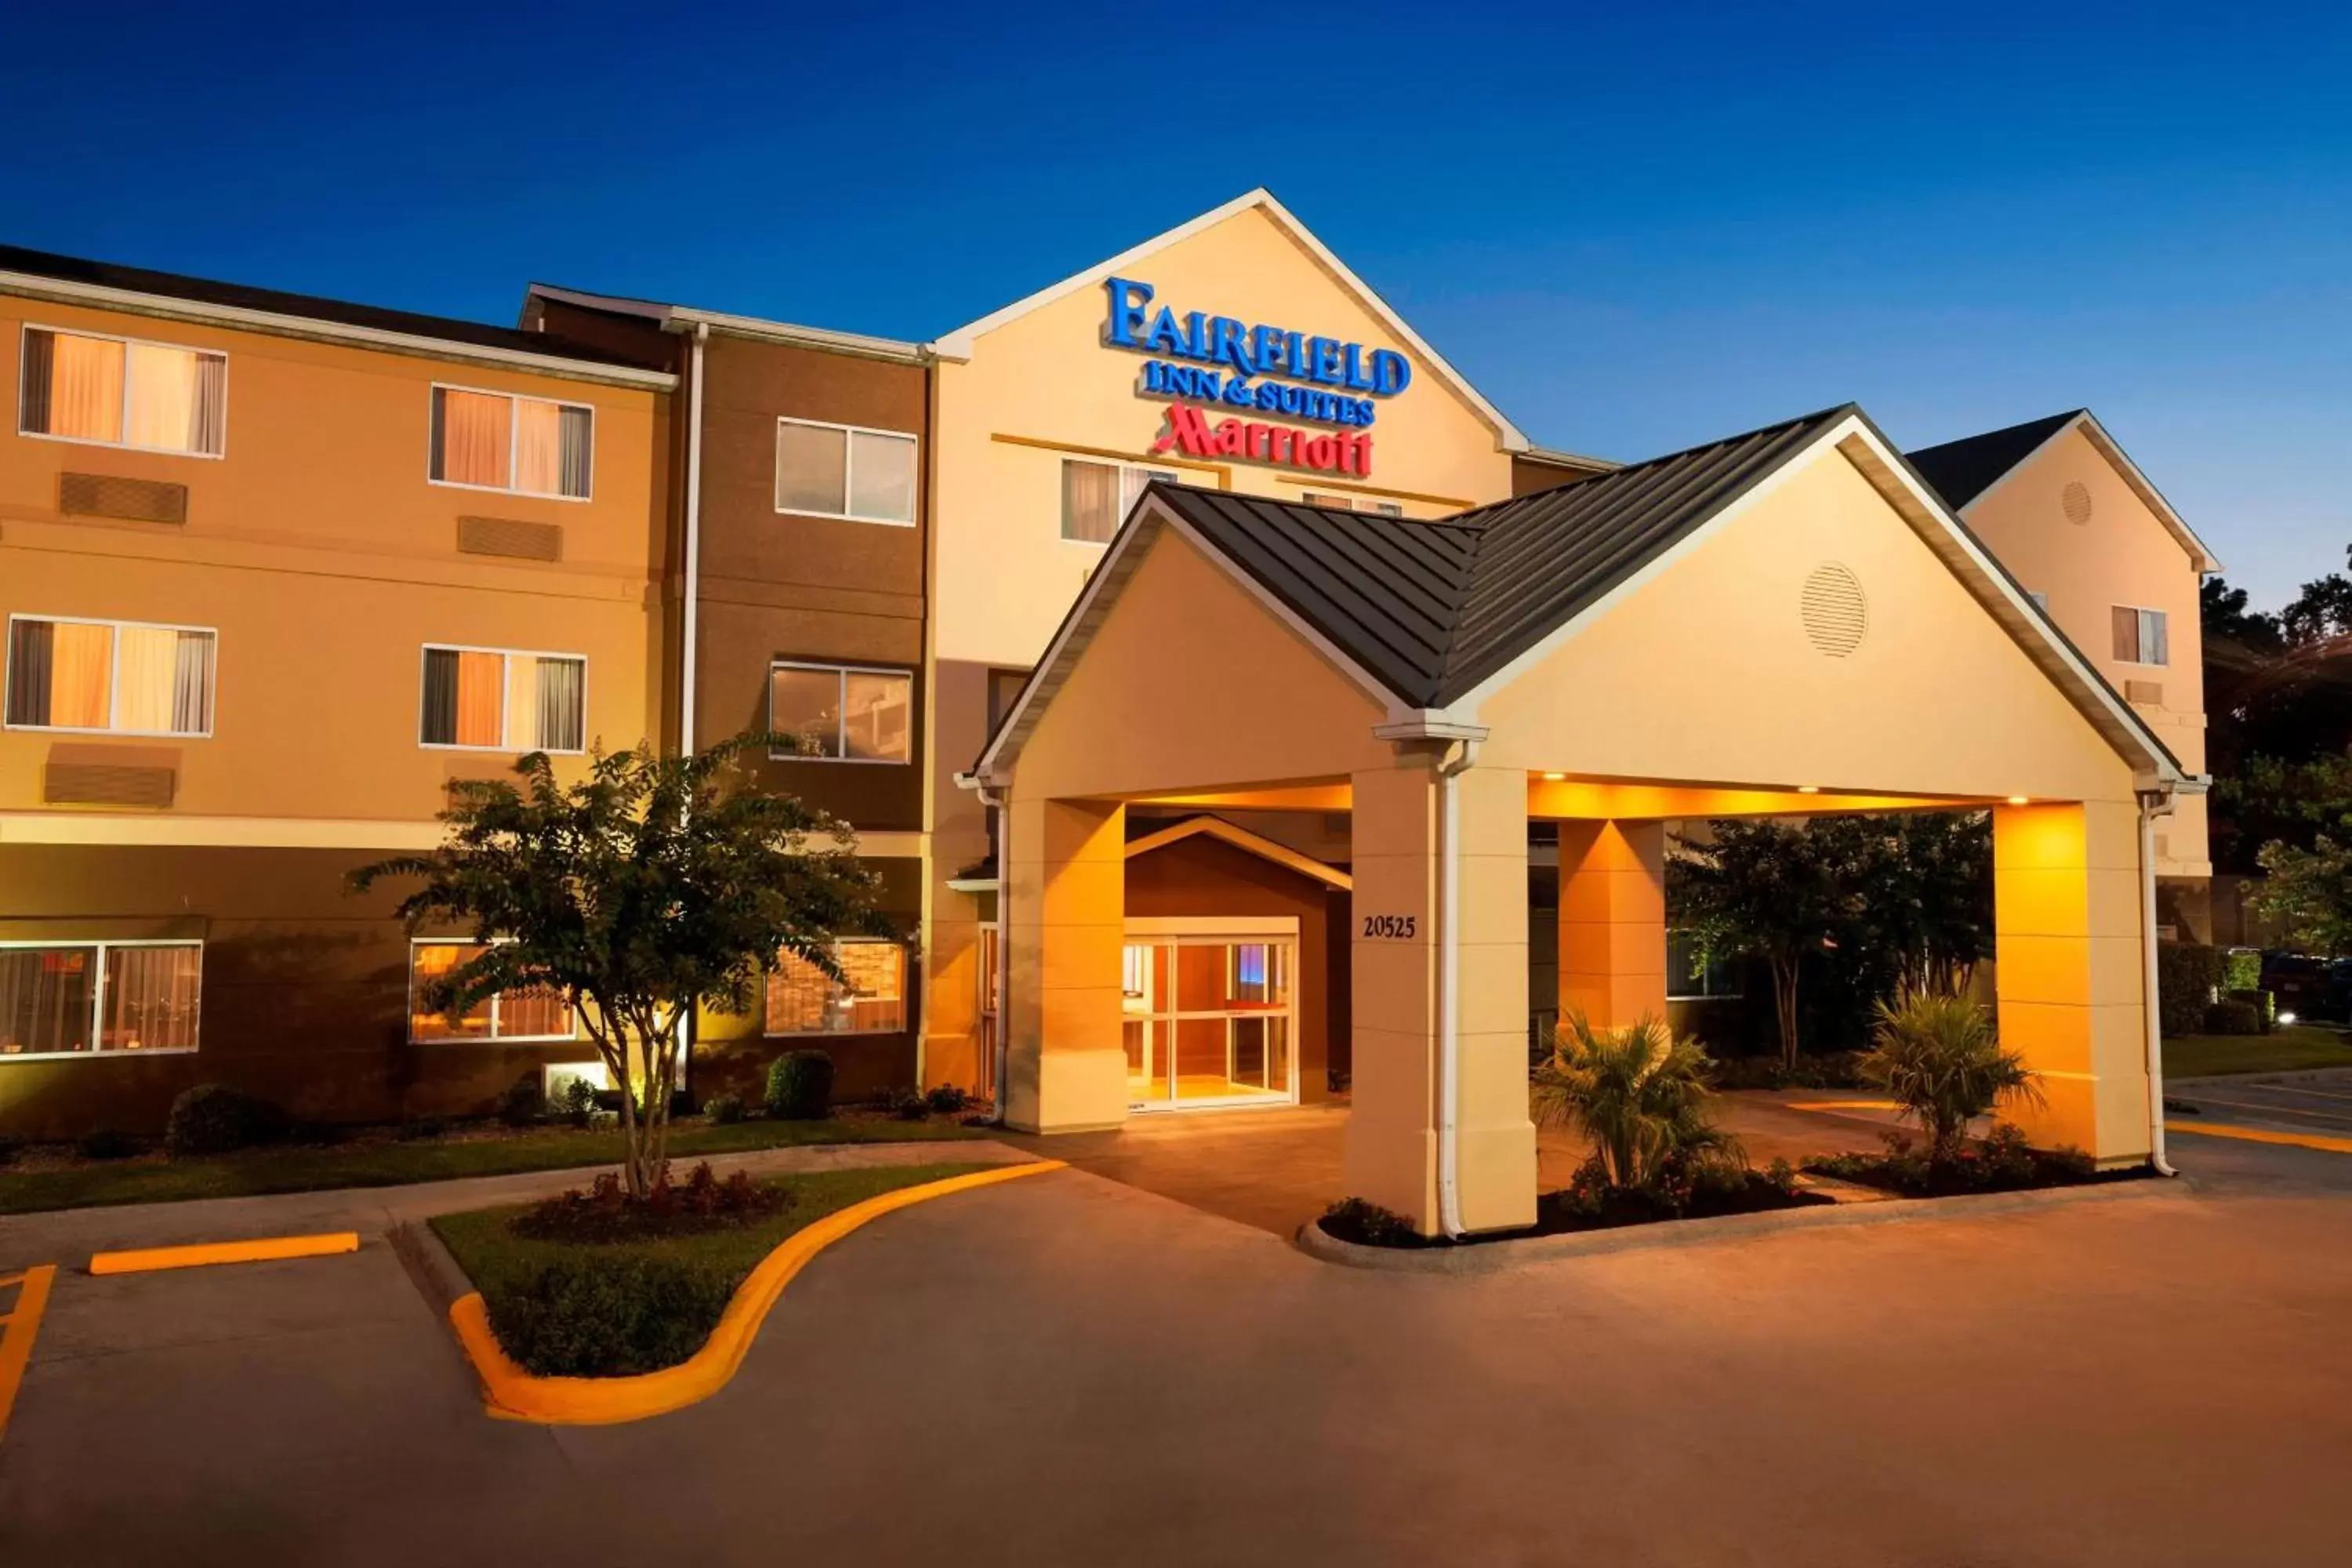 Property Building in Fairfield Inn & Suites Houston Humble